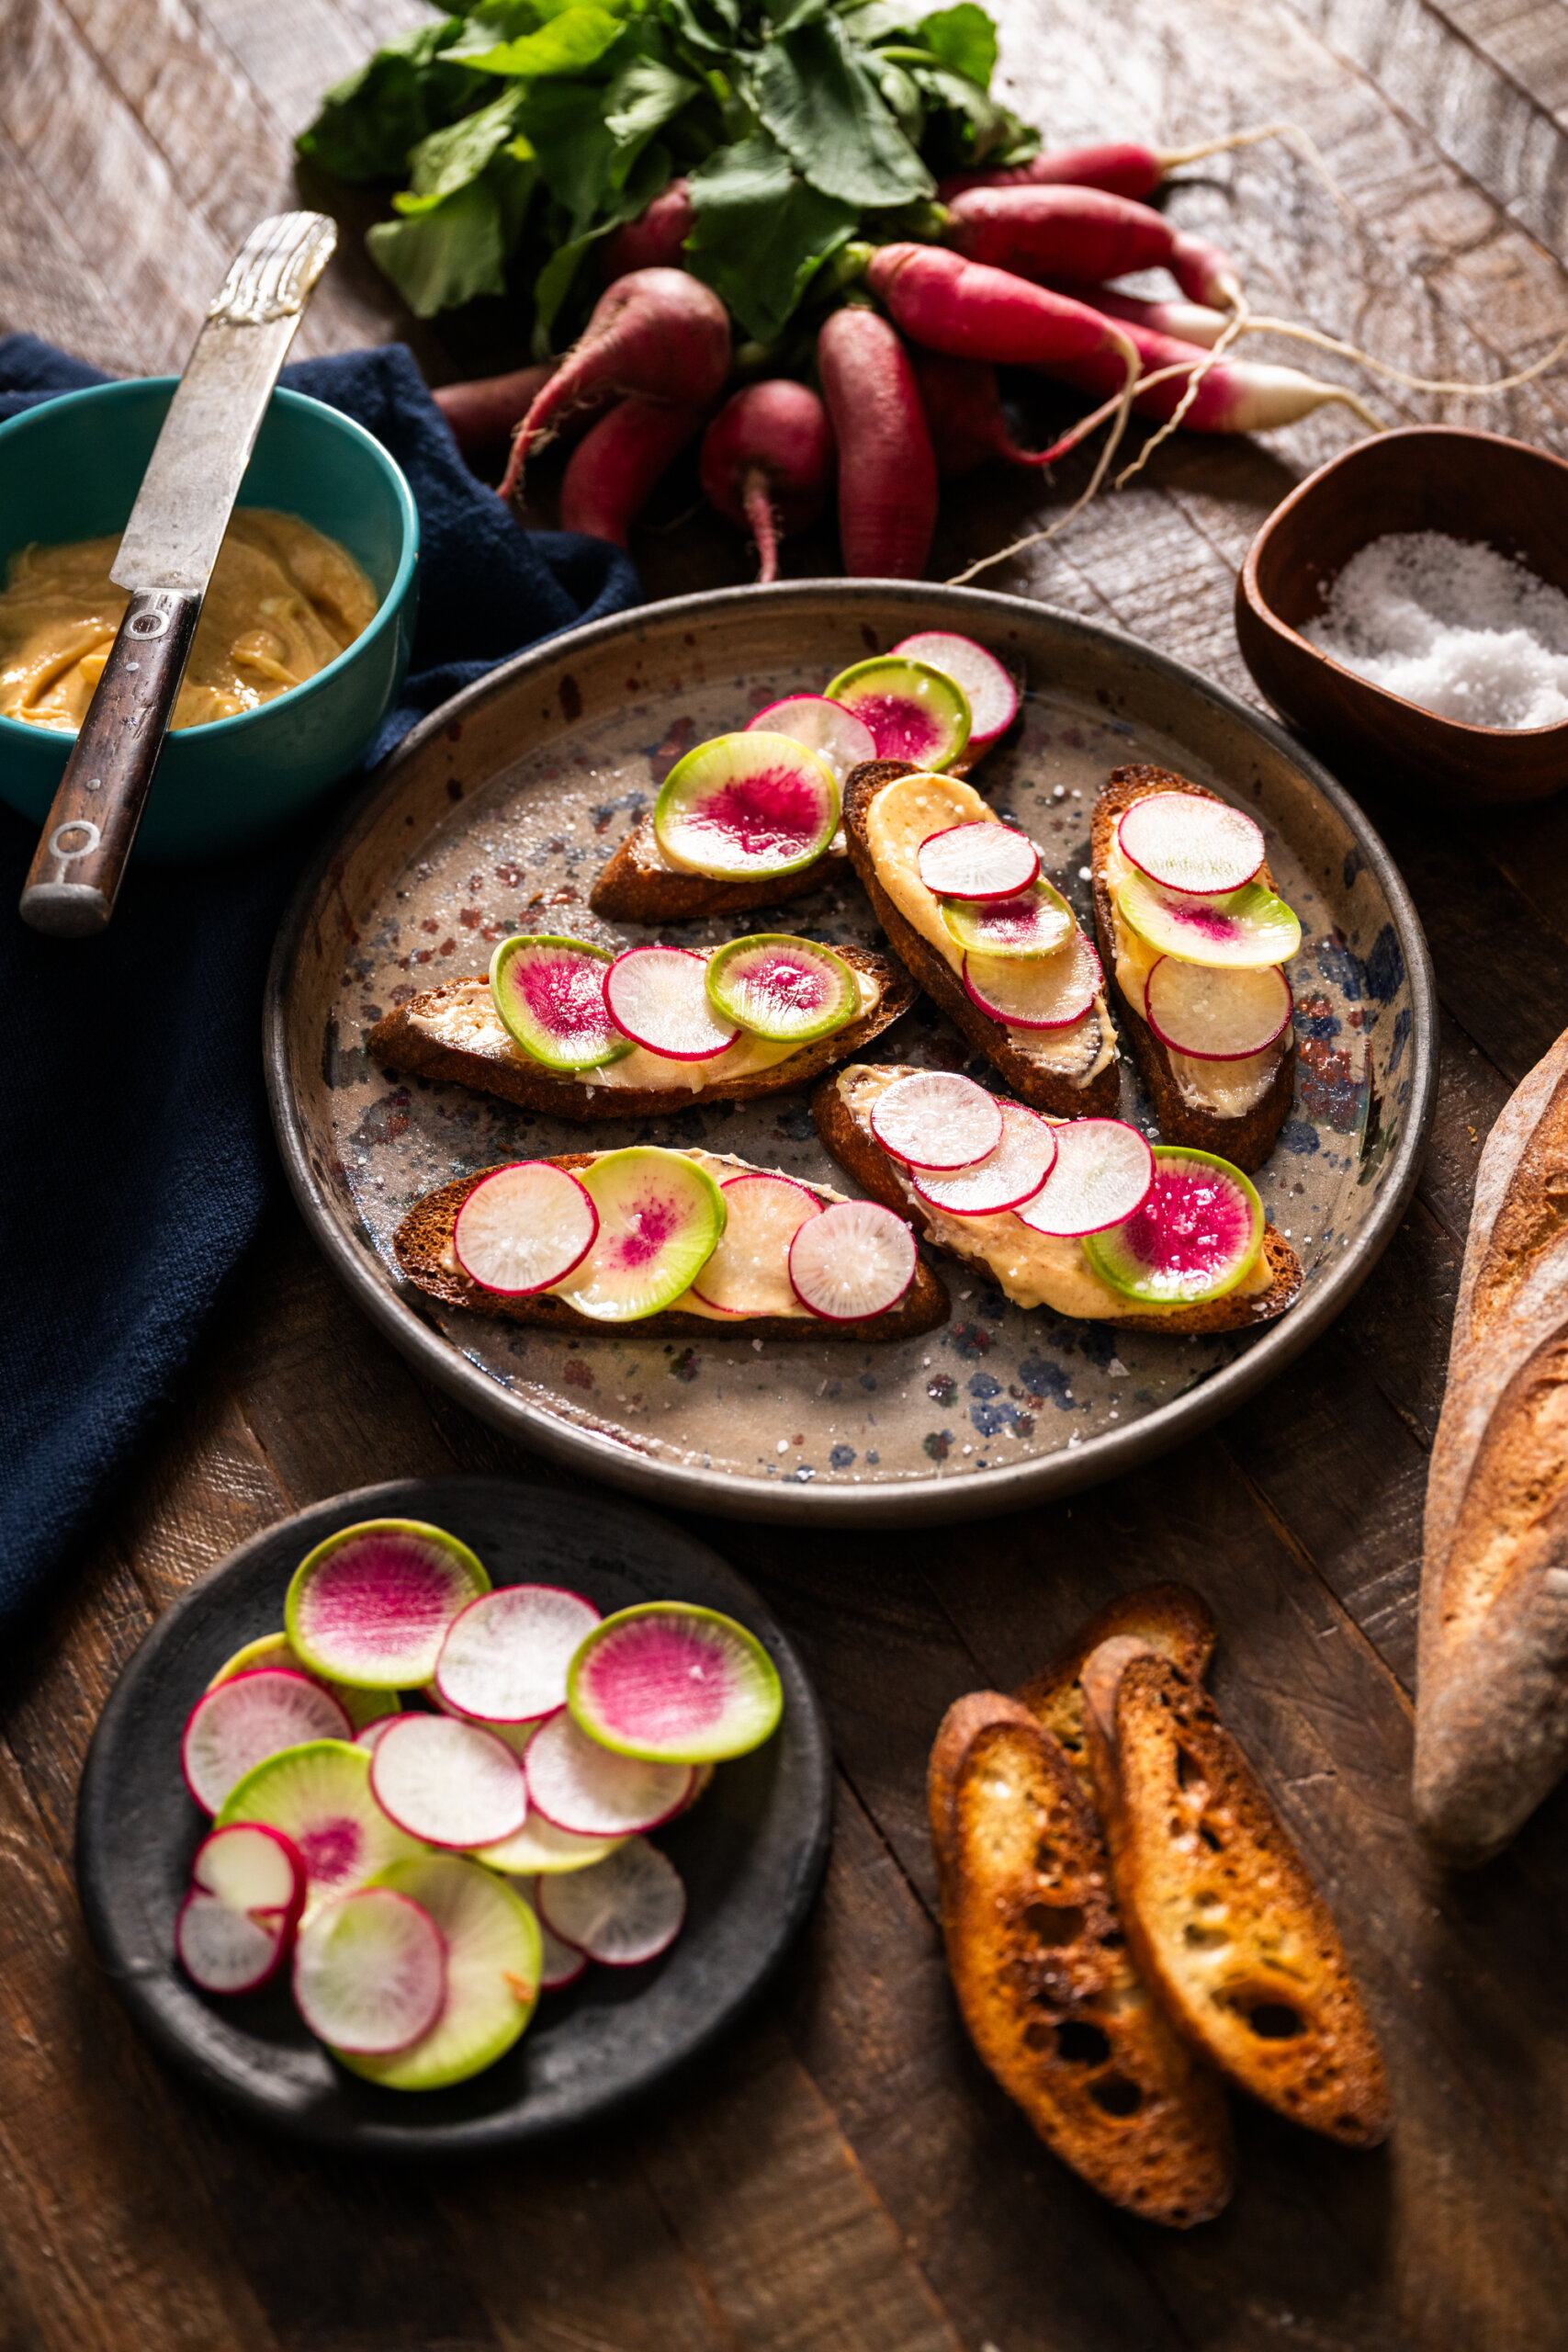 Breakfast and watermelon radishes on crostini with Lawry's compound butter